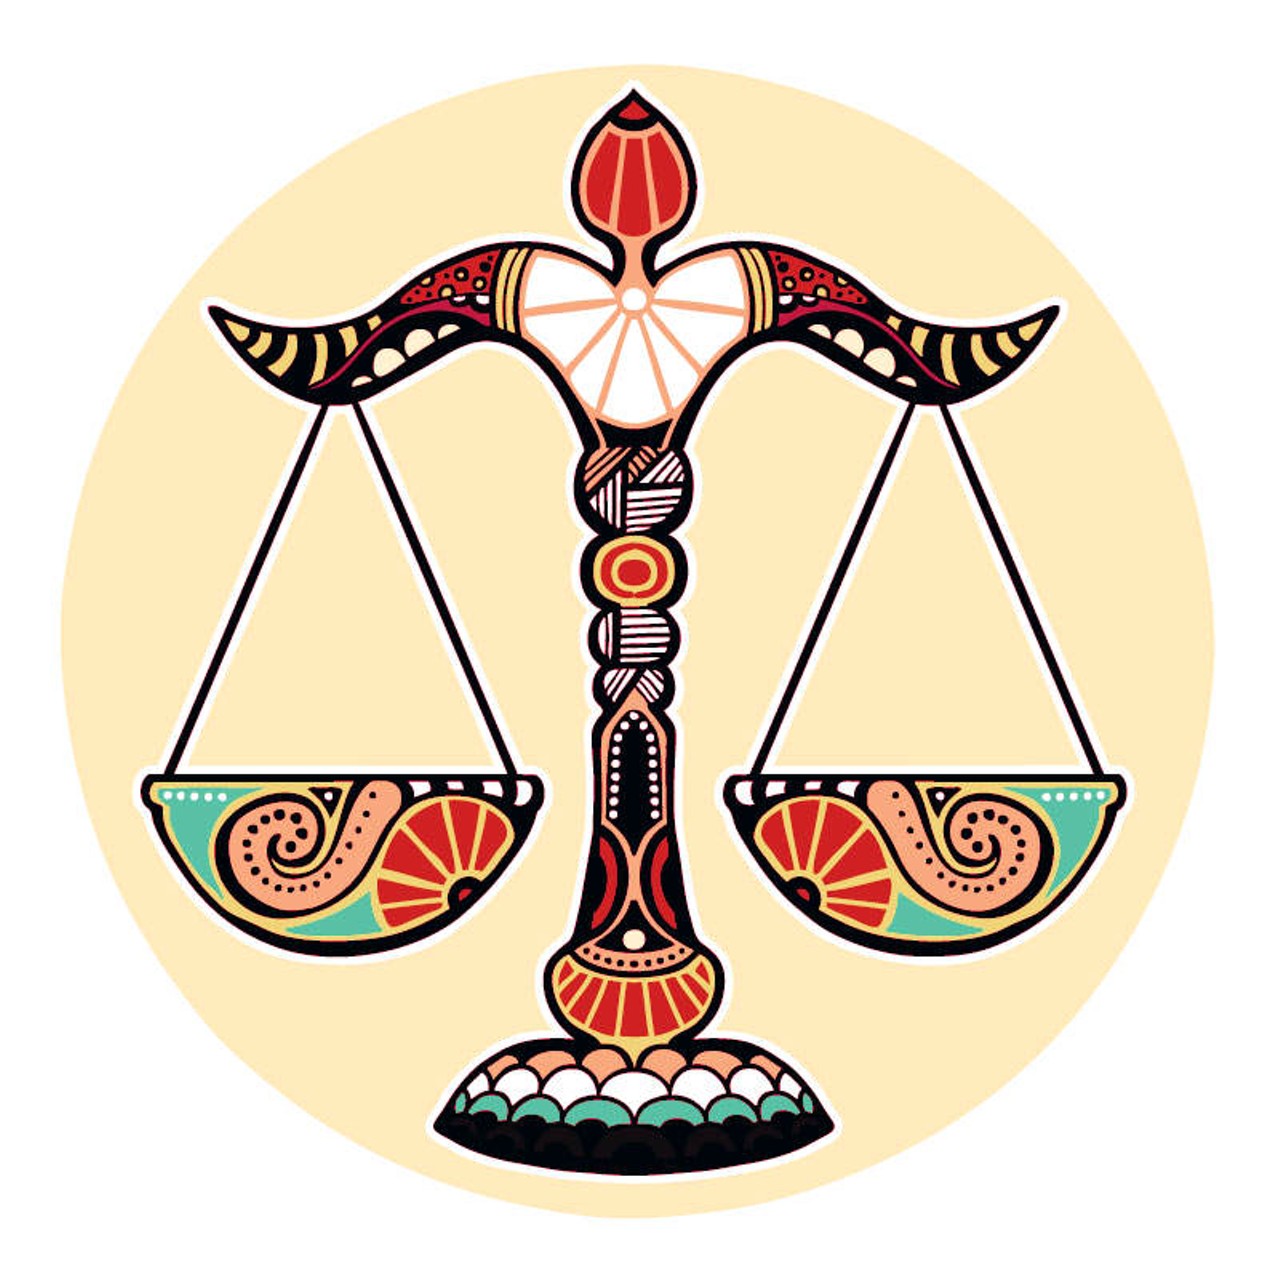 LIBRA (Sept. 21-Oct. 20): 
You don&#146;t care what people think about where you&#146;re at. It&#146;s been such a mind blow to finally begin to see how little others have been there for you. If you wanted to you could use this as a great excuse to keep going downhill &#151; but for whatever reason this absence of support has taught you how to rise up and be who you are. After a long stretch of wondering what it would take to want to keep living the answer has come in the form of a person or an opportunity that is here to help you shine. Open your heart to the newness of love and to the beginning of happier times.